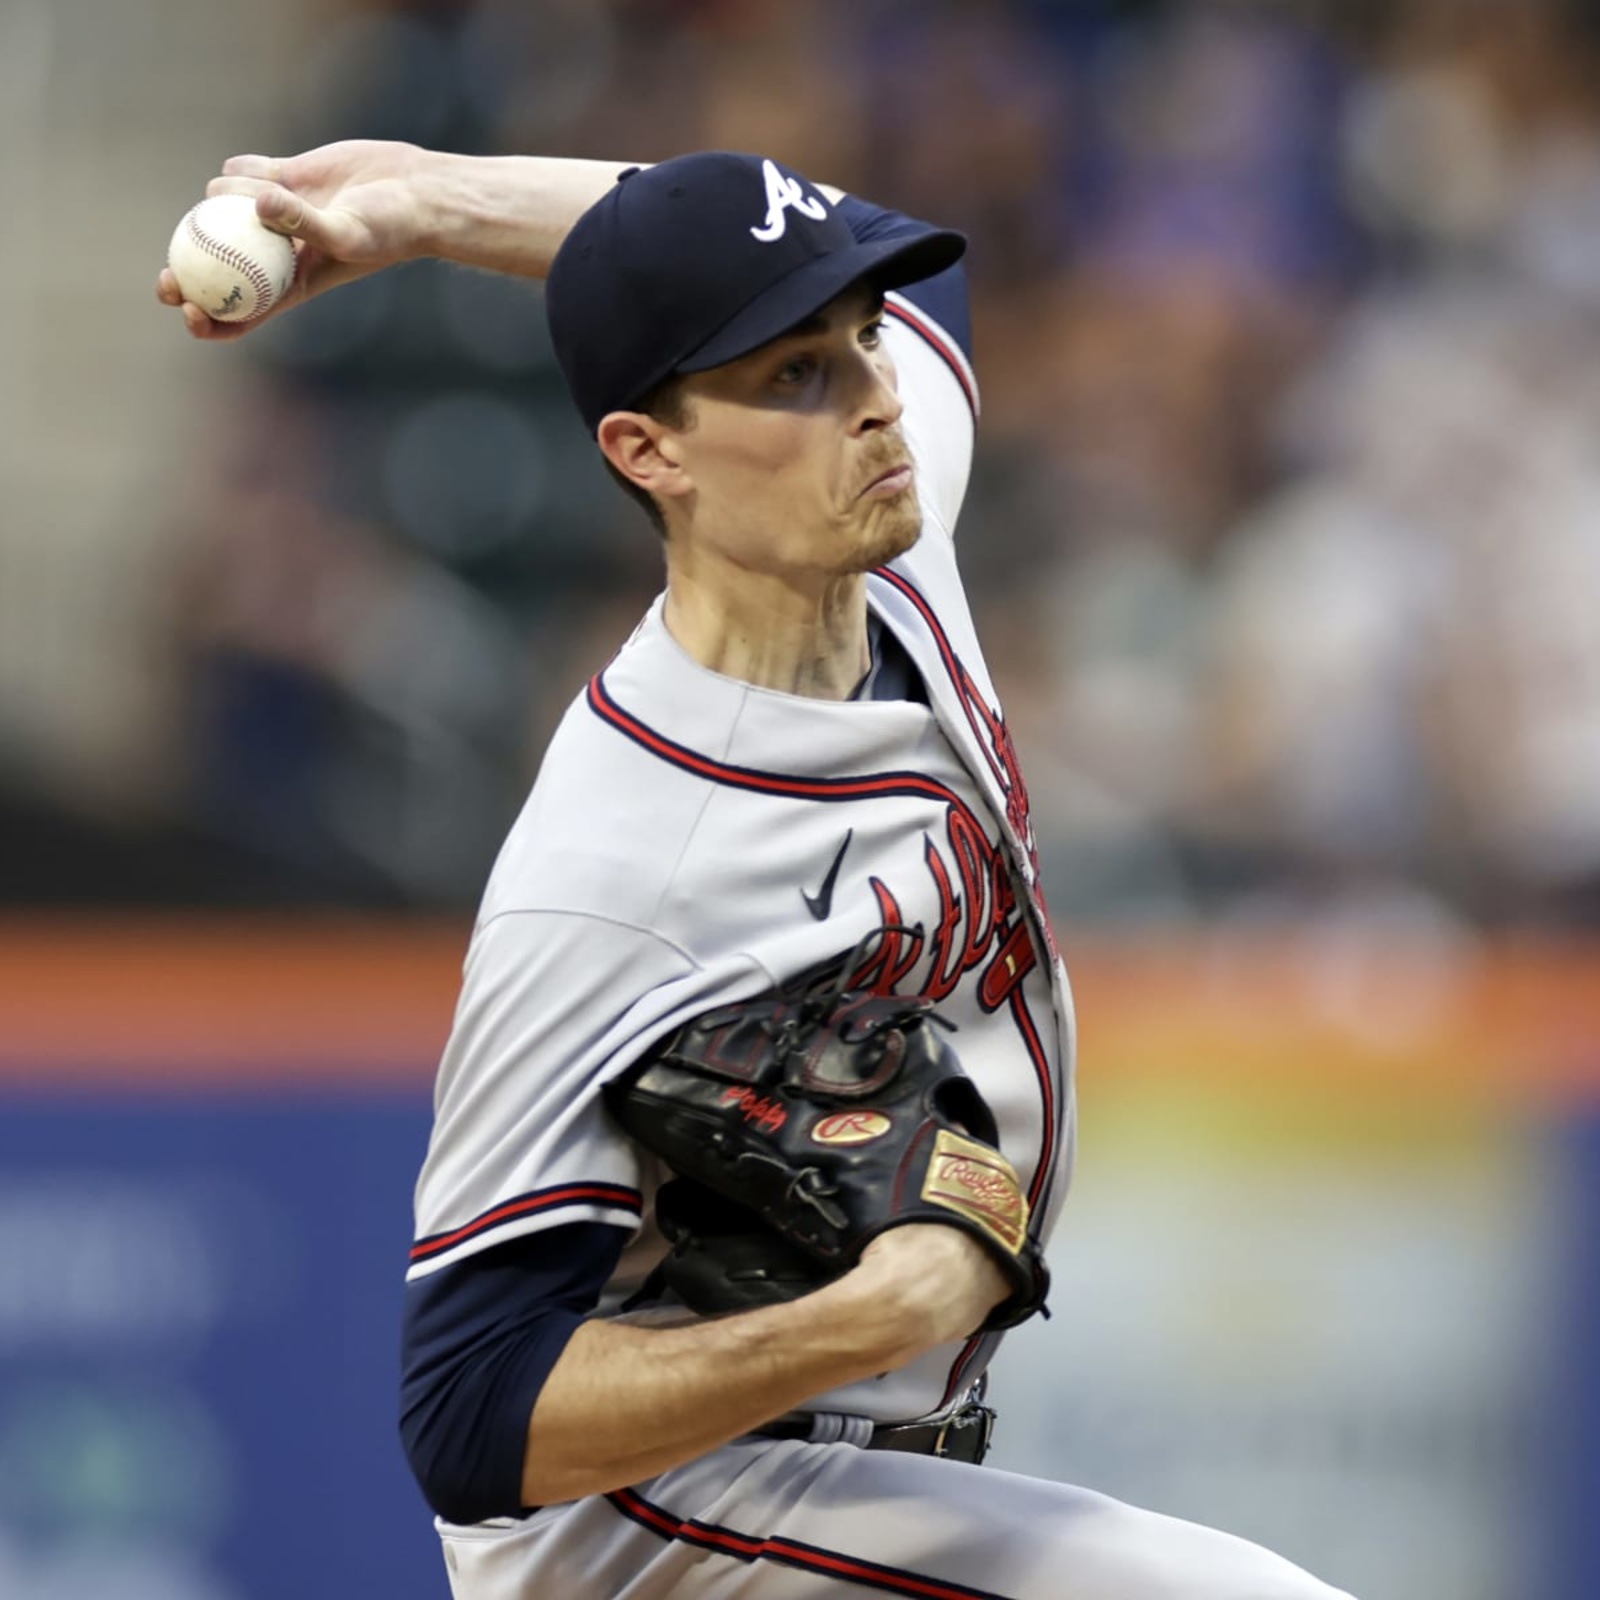 Max Fried who is the Braves pitcher for Game 5 tonight